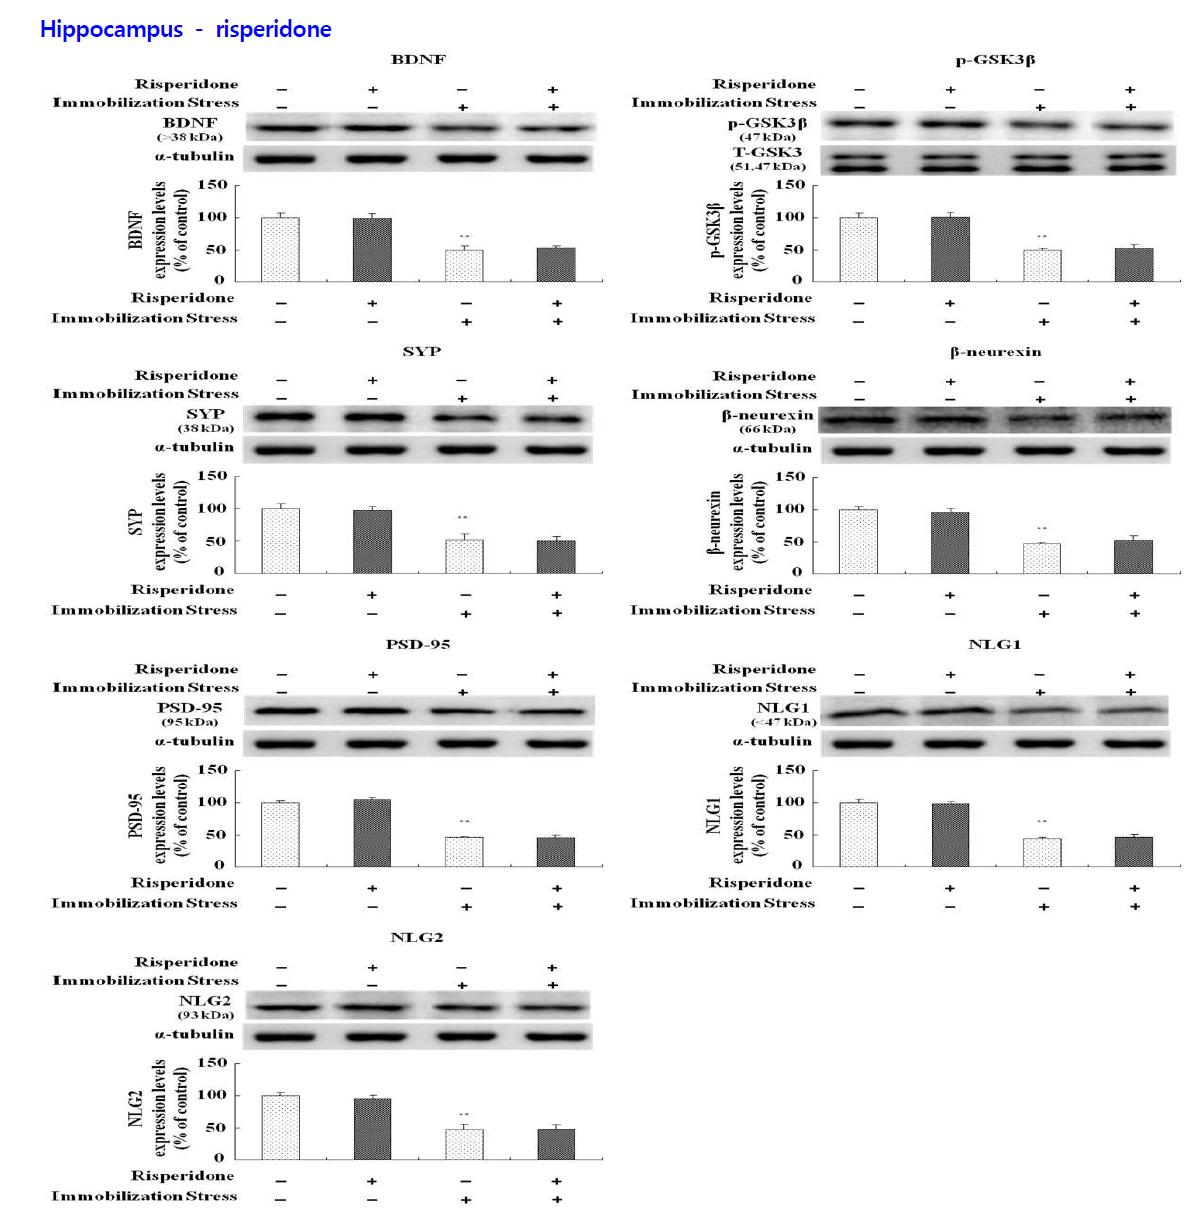 Effects of antipsychotic drugs on the levels of BDNF, phospho-ser9-GSK-3β, synaptophysin, β-neurexin, PSD-95, neuroligin 1 and neurologin 2 expression in hippocampus of rats.